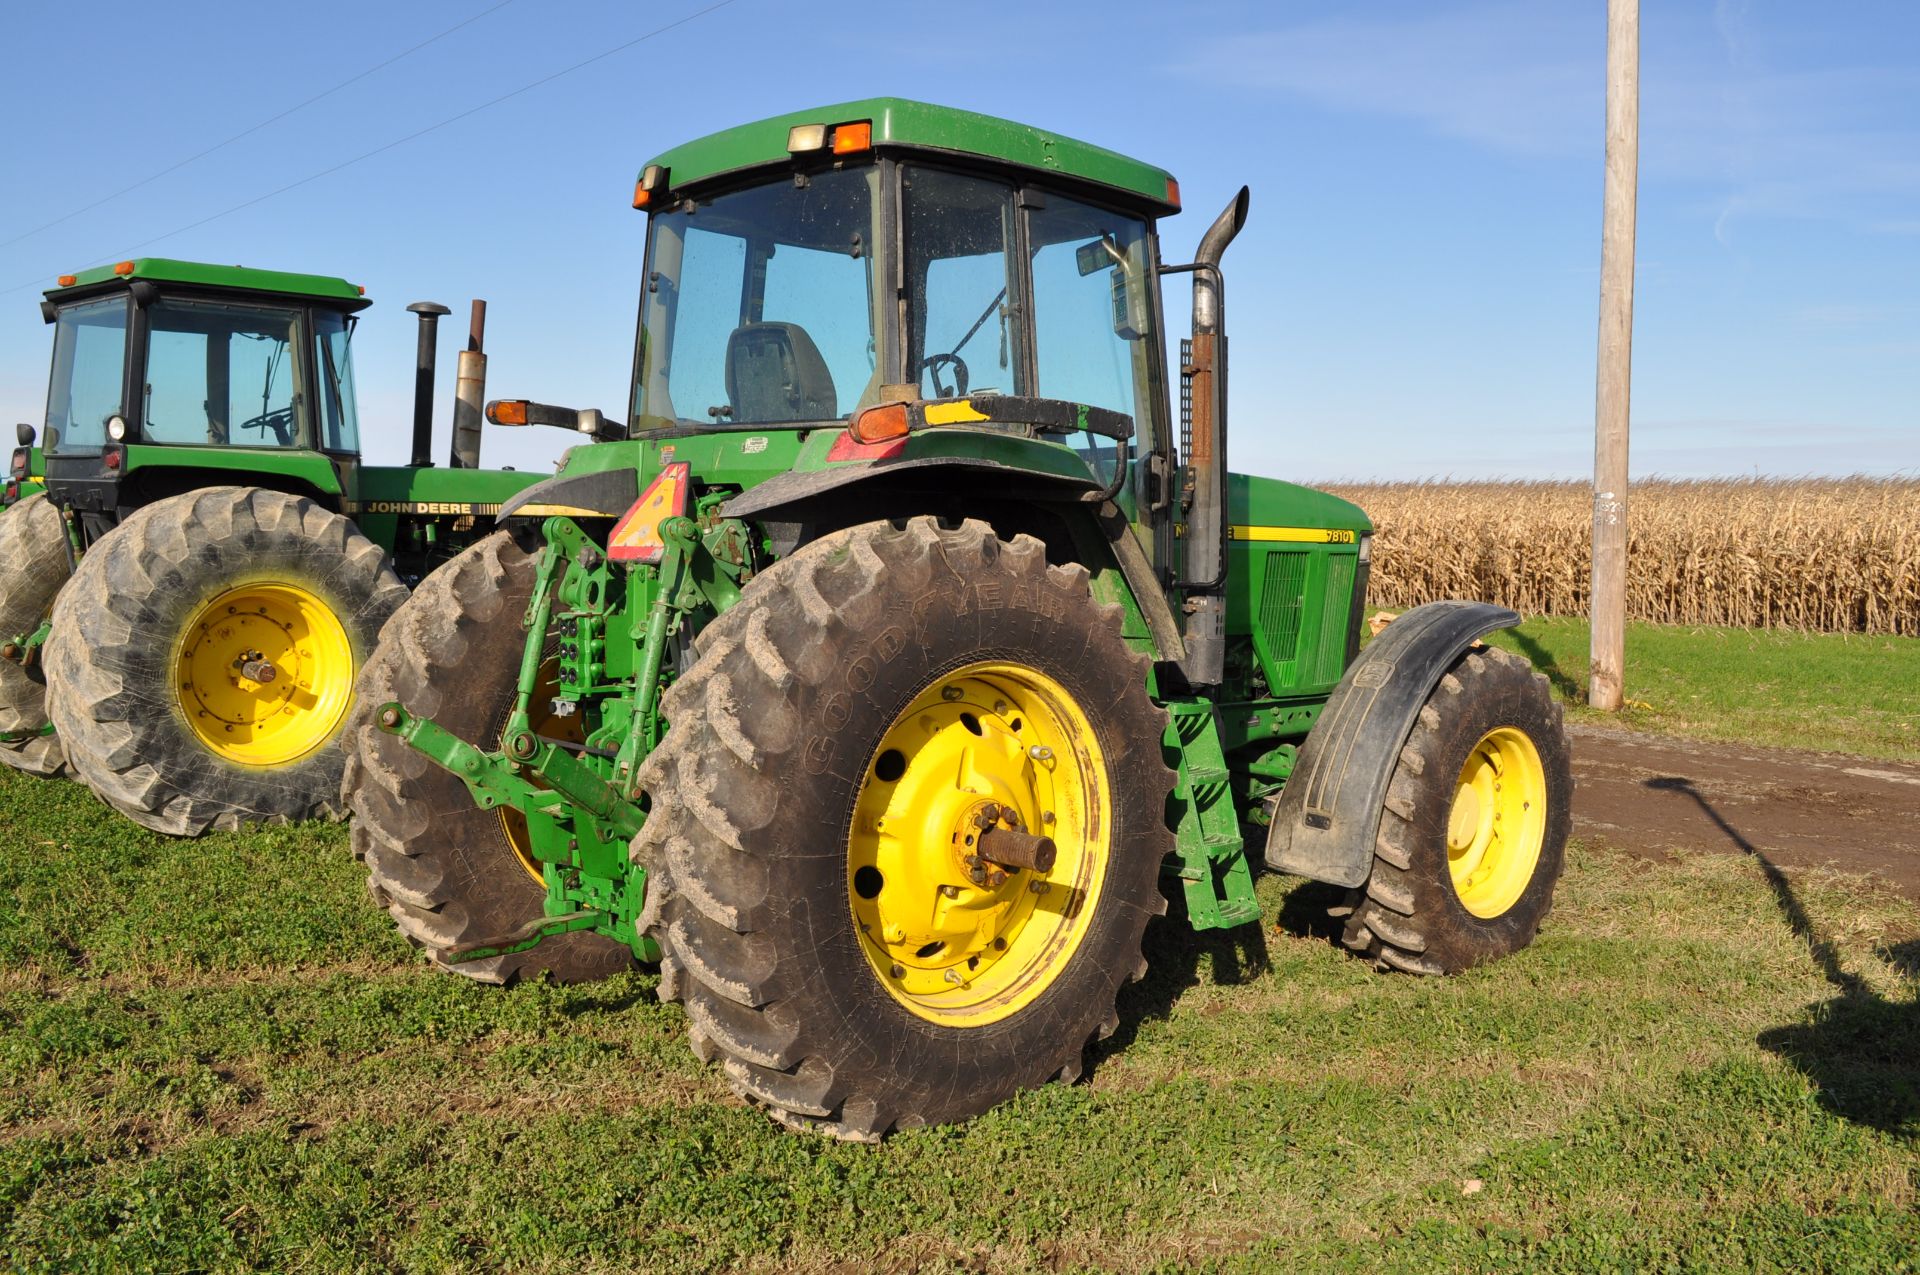 John Deere 7810 tractor, MFWD, 19-speed, power-shift, 3 hydr remotes, 3-pt, 1000 PTO, front weights, - Image 2 of 32